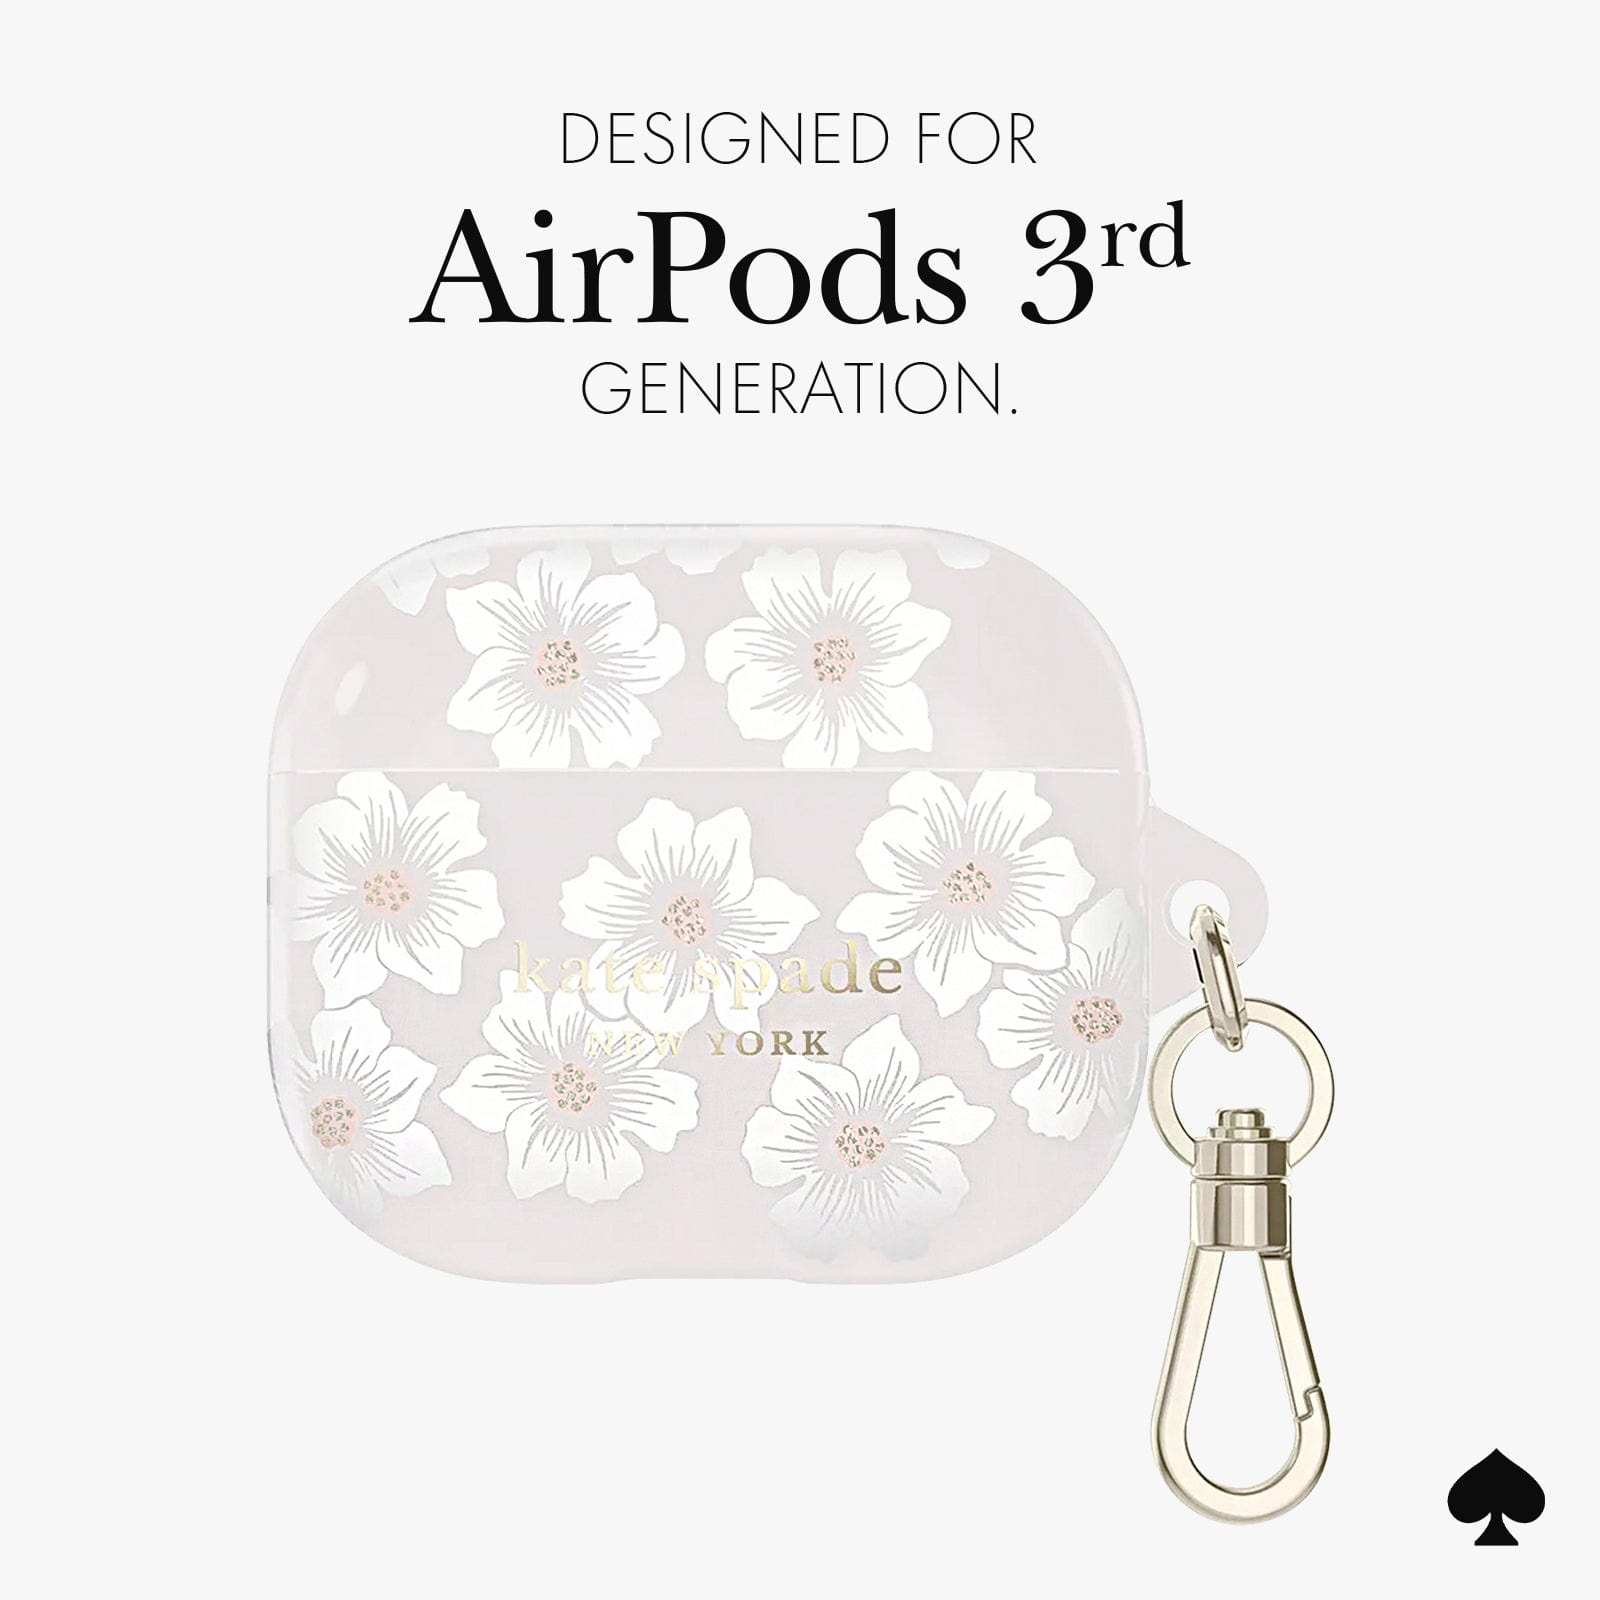 DESIGNED FOR AIRPODS 3RD GEN